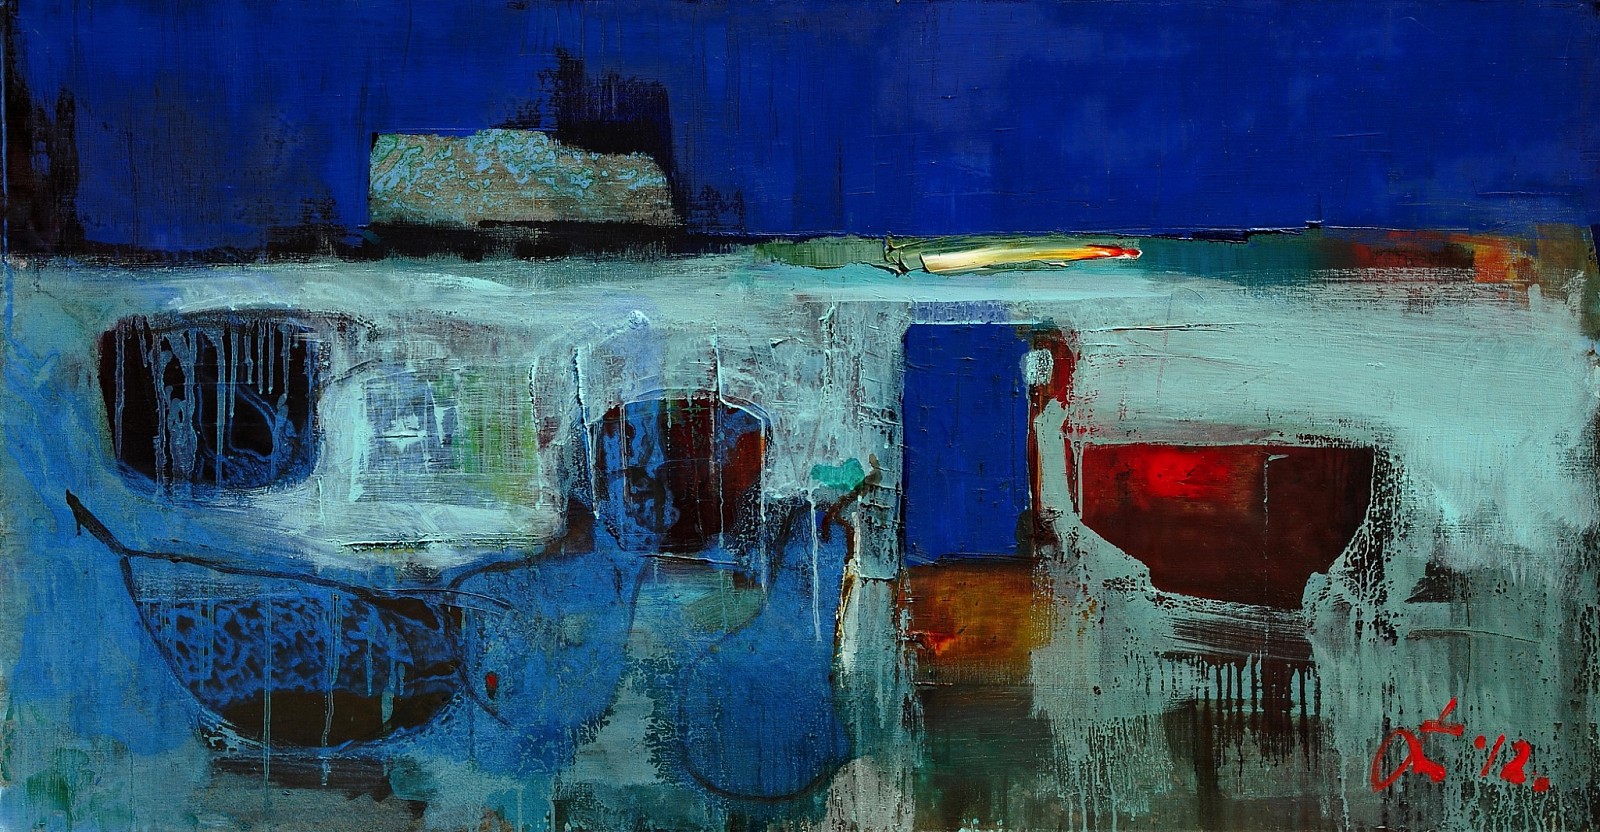 Serhiy Hai, Blue Abstract Still Life, 2020
Oil, acrylic on canvas, 31.25" x 59", 33.5" x 63" framed
SY 116
Price Upon Request